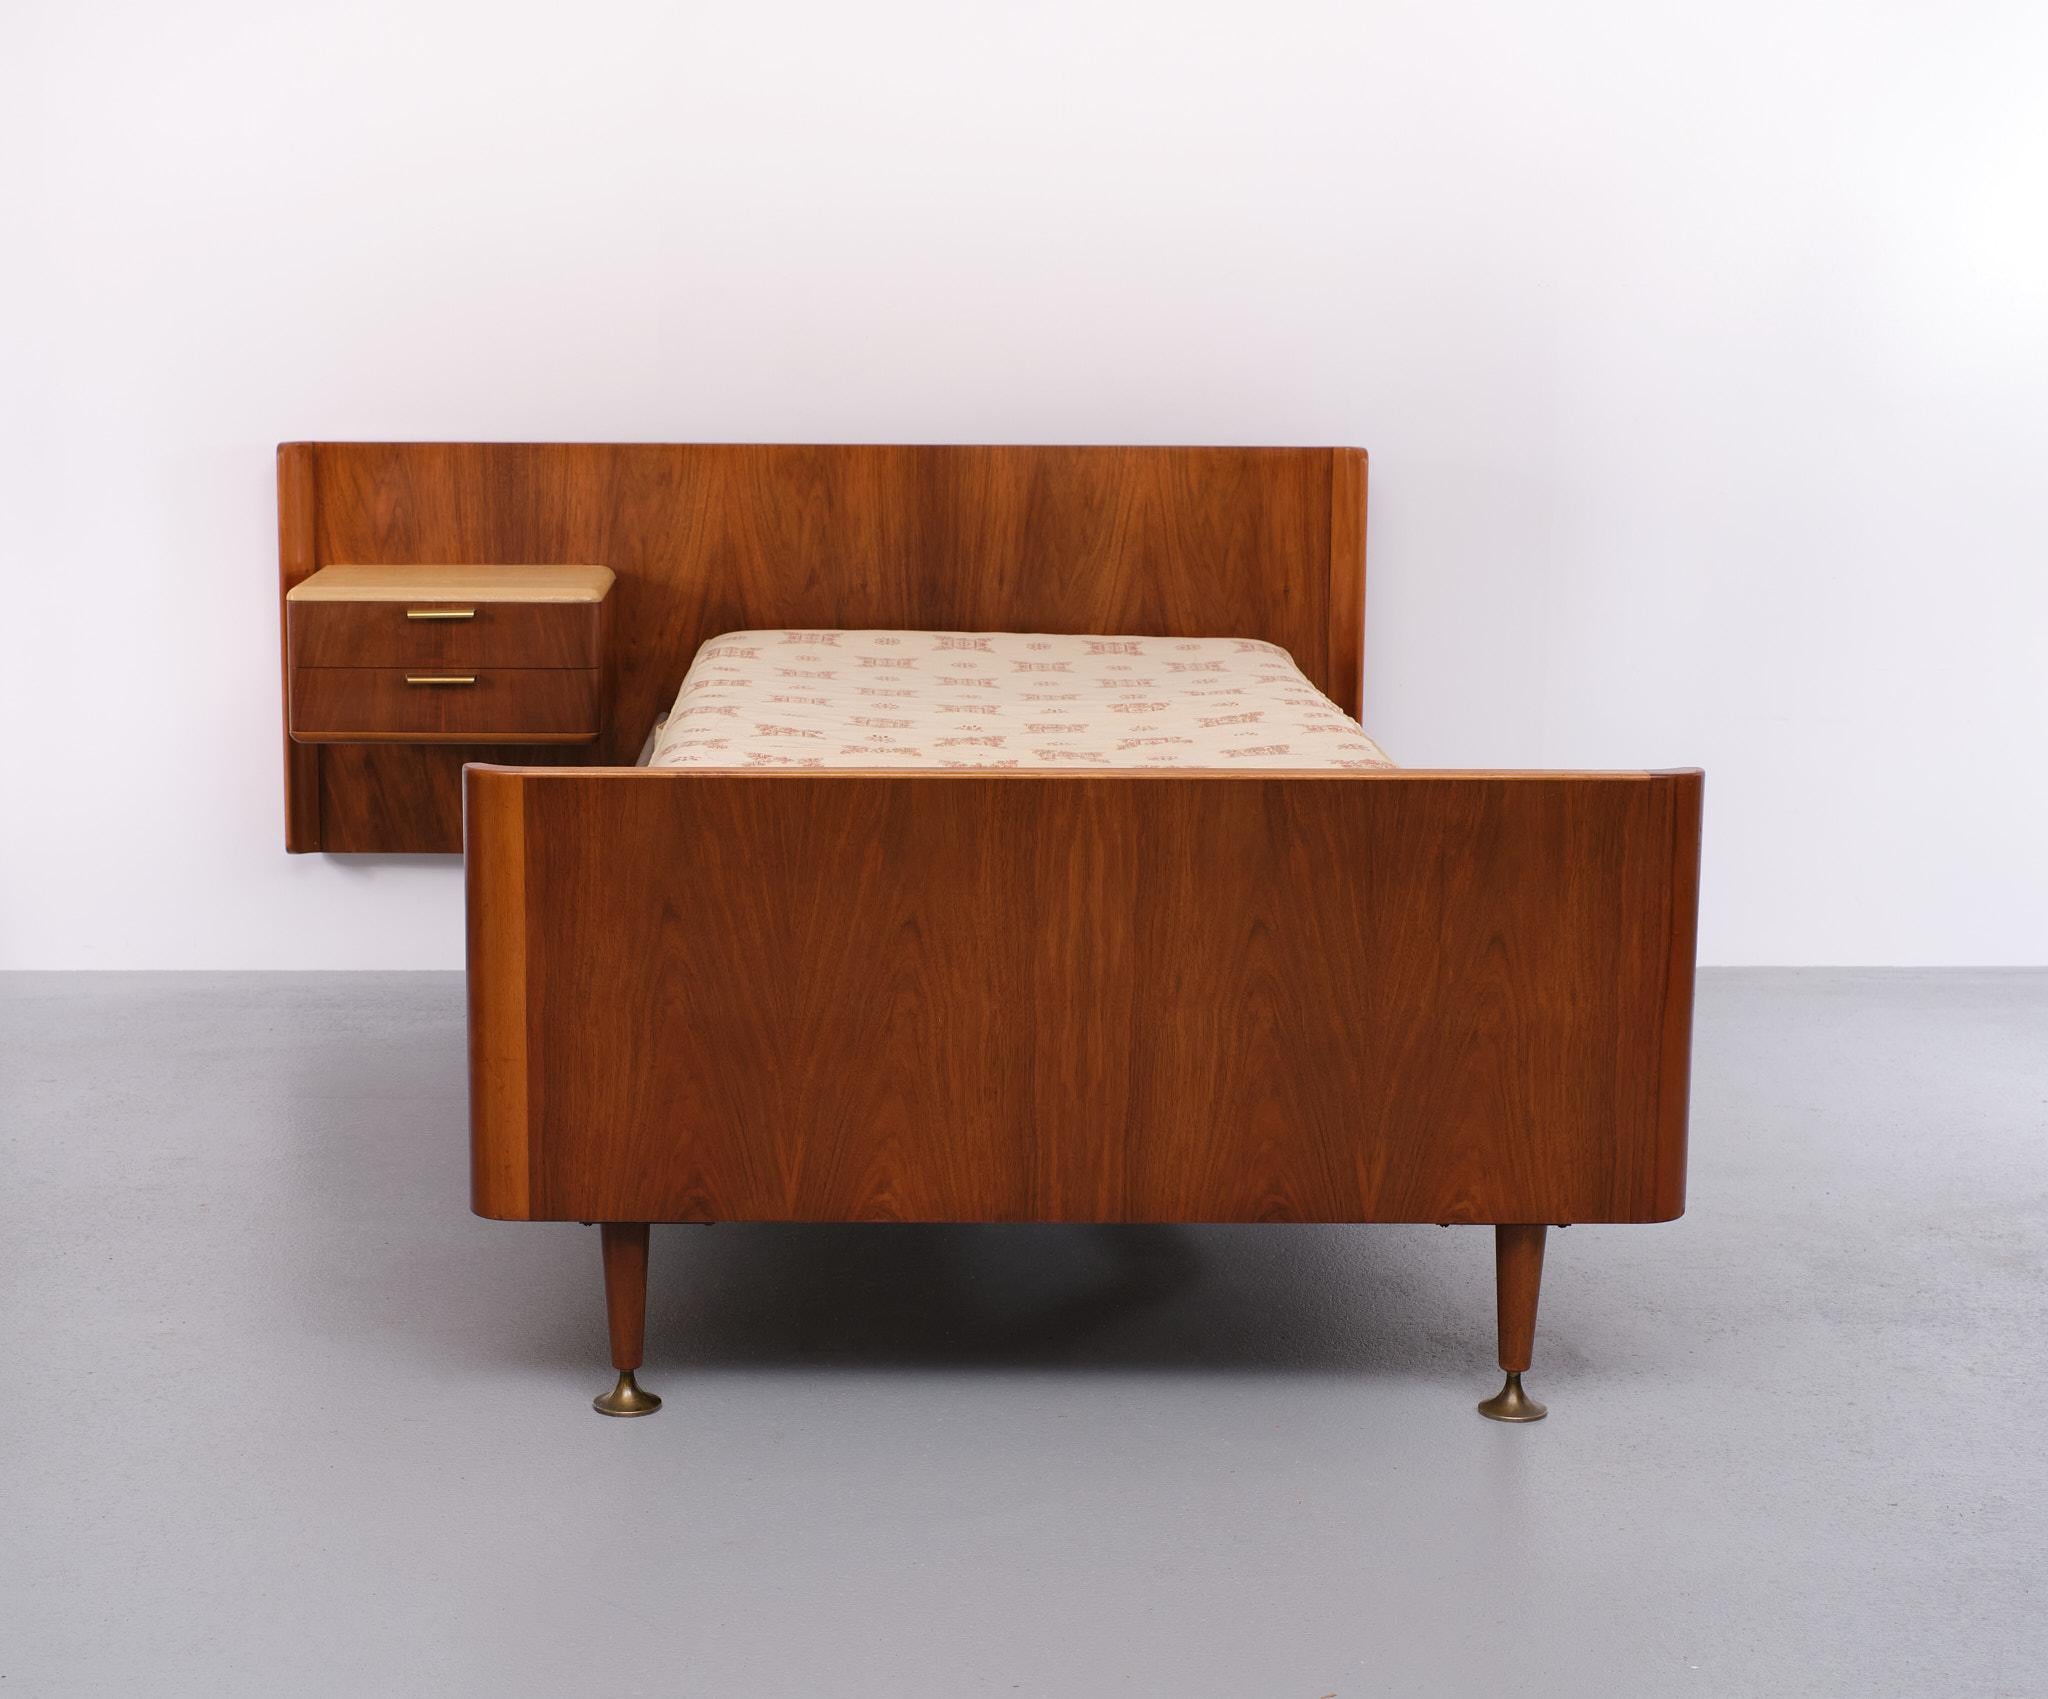 Abraham A Patijn  single Bed  for Zijlstra   1950s  Holland  1